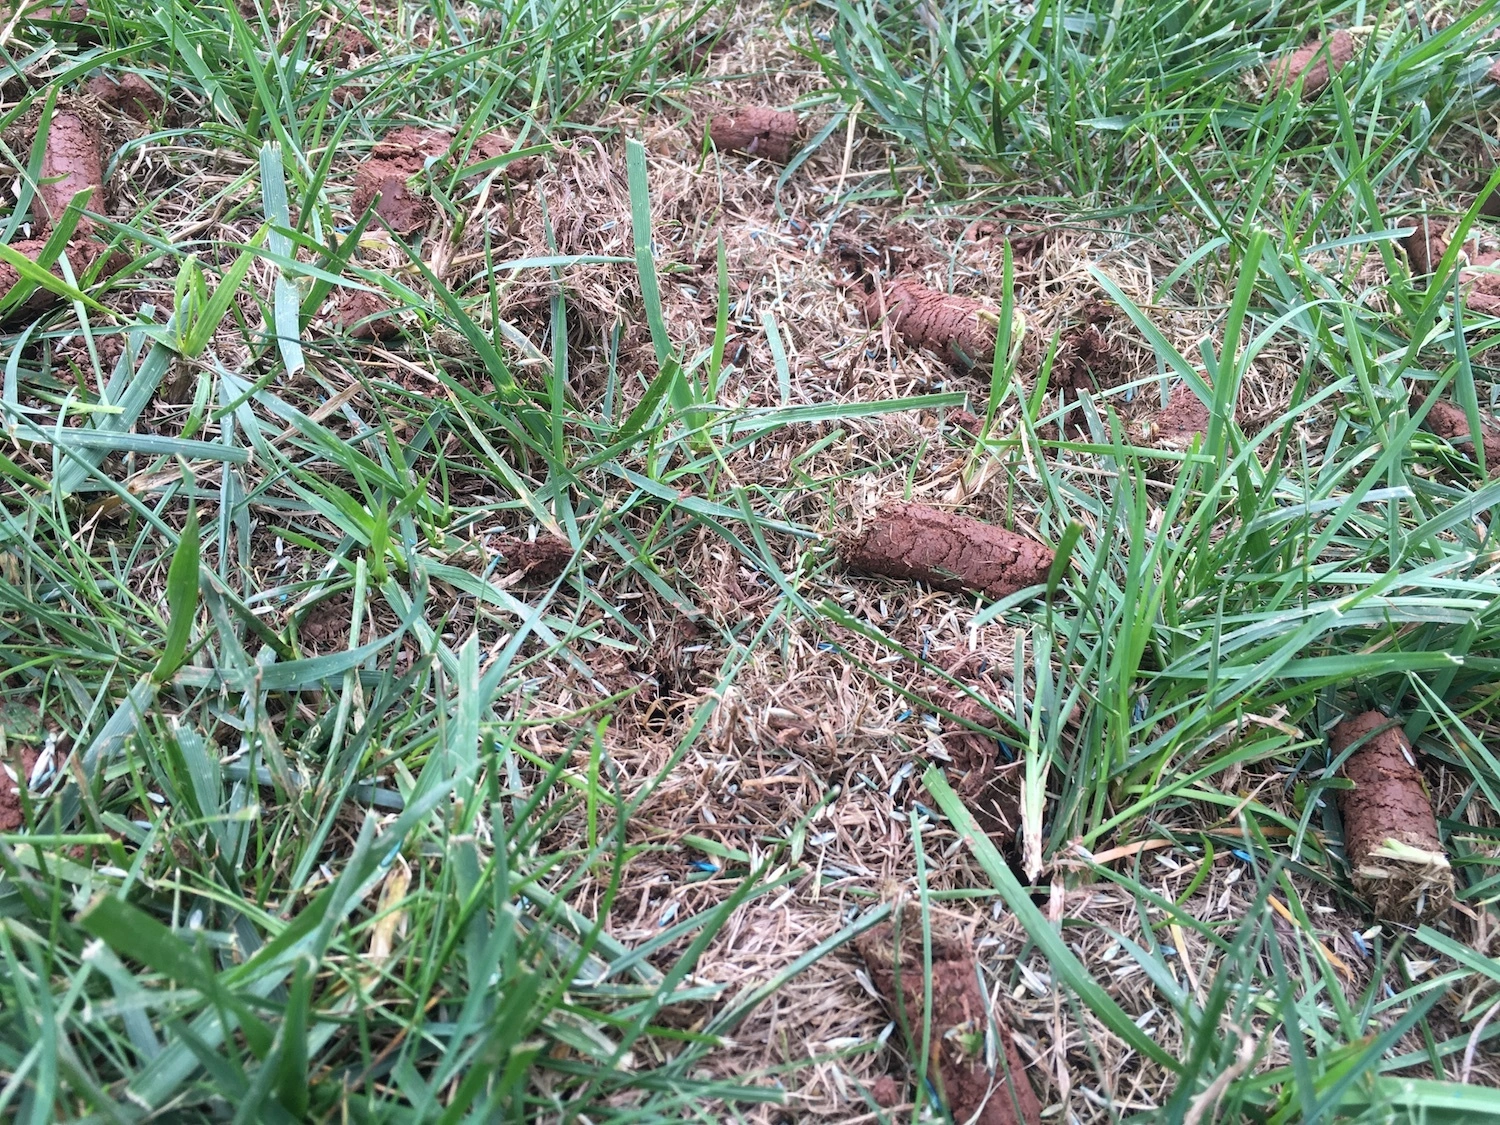 aeration plugs and grass seed on yellow lawn 